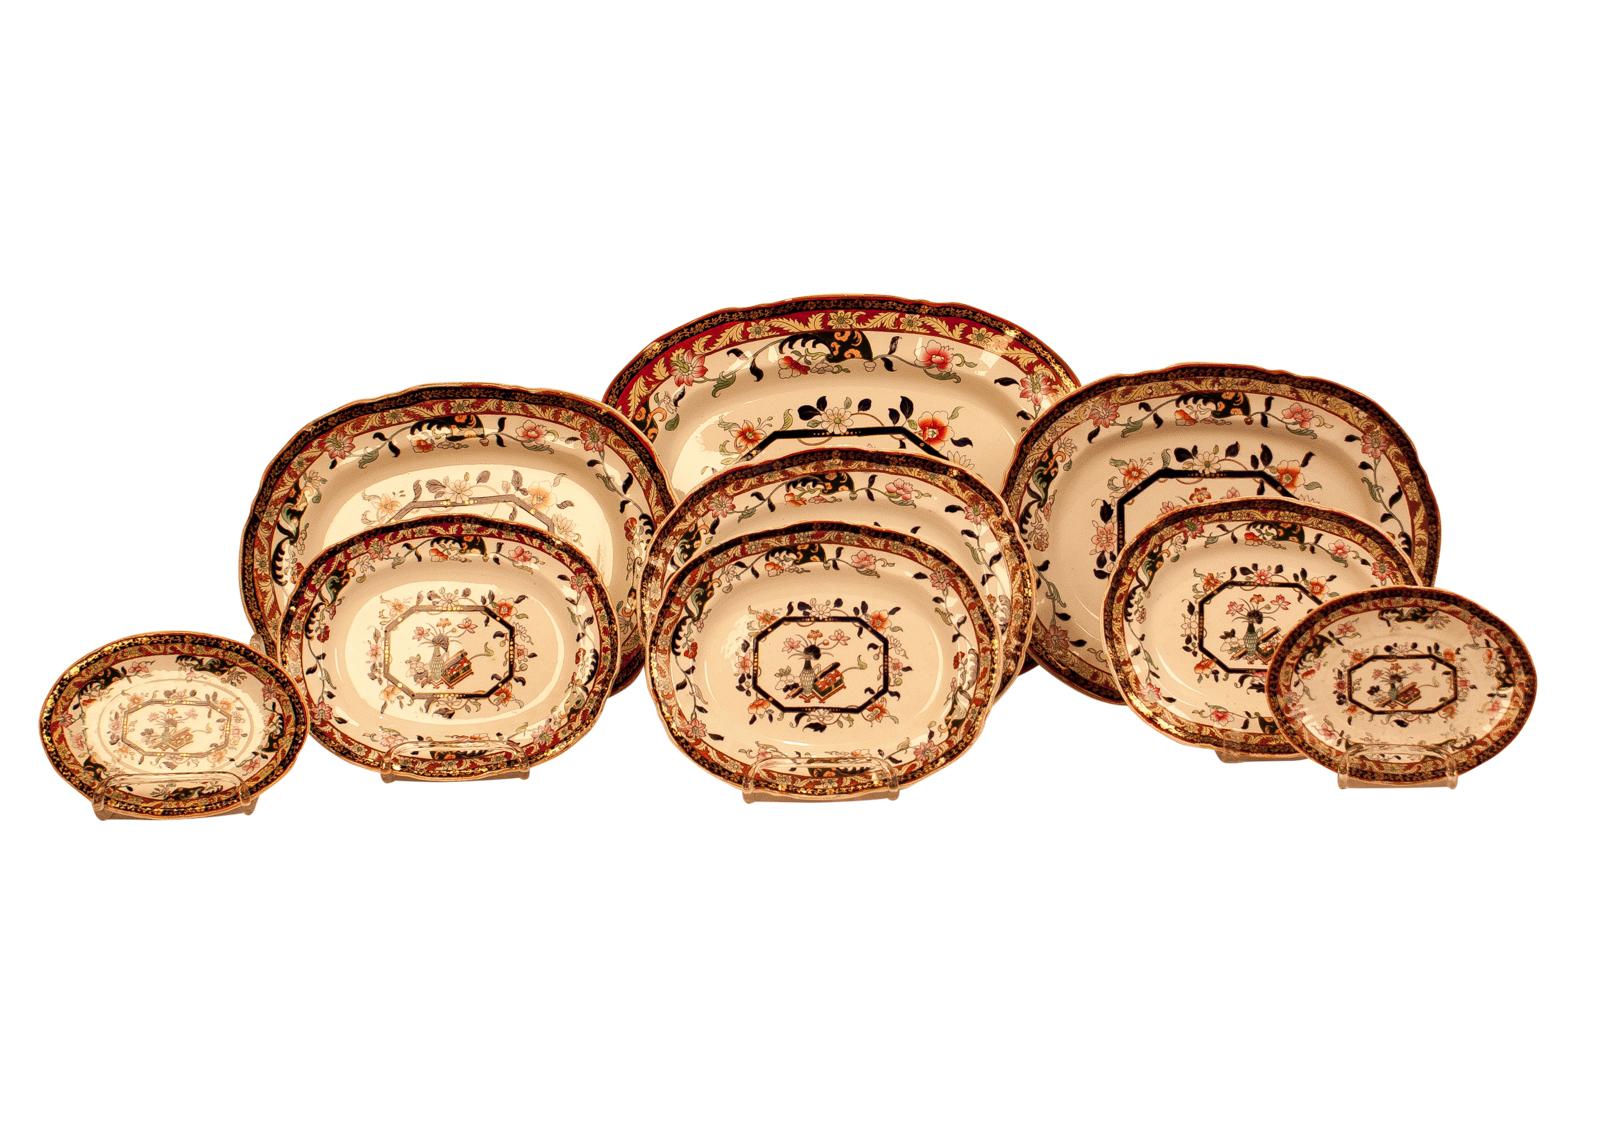 An extensive part dinner service of 85 pieces of Ashworth Ironstone, England circa 1870. The measurement is for the largest piece. This set is comprised of the following pieces: plate 10.25